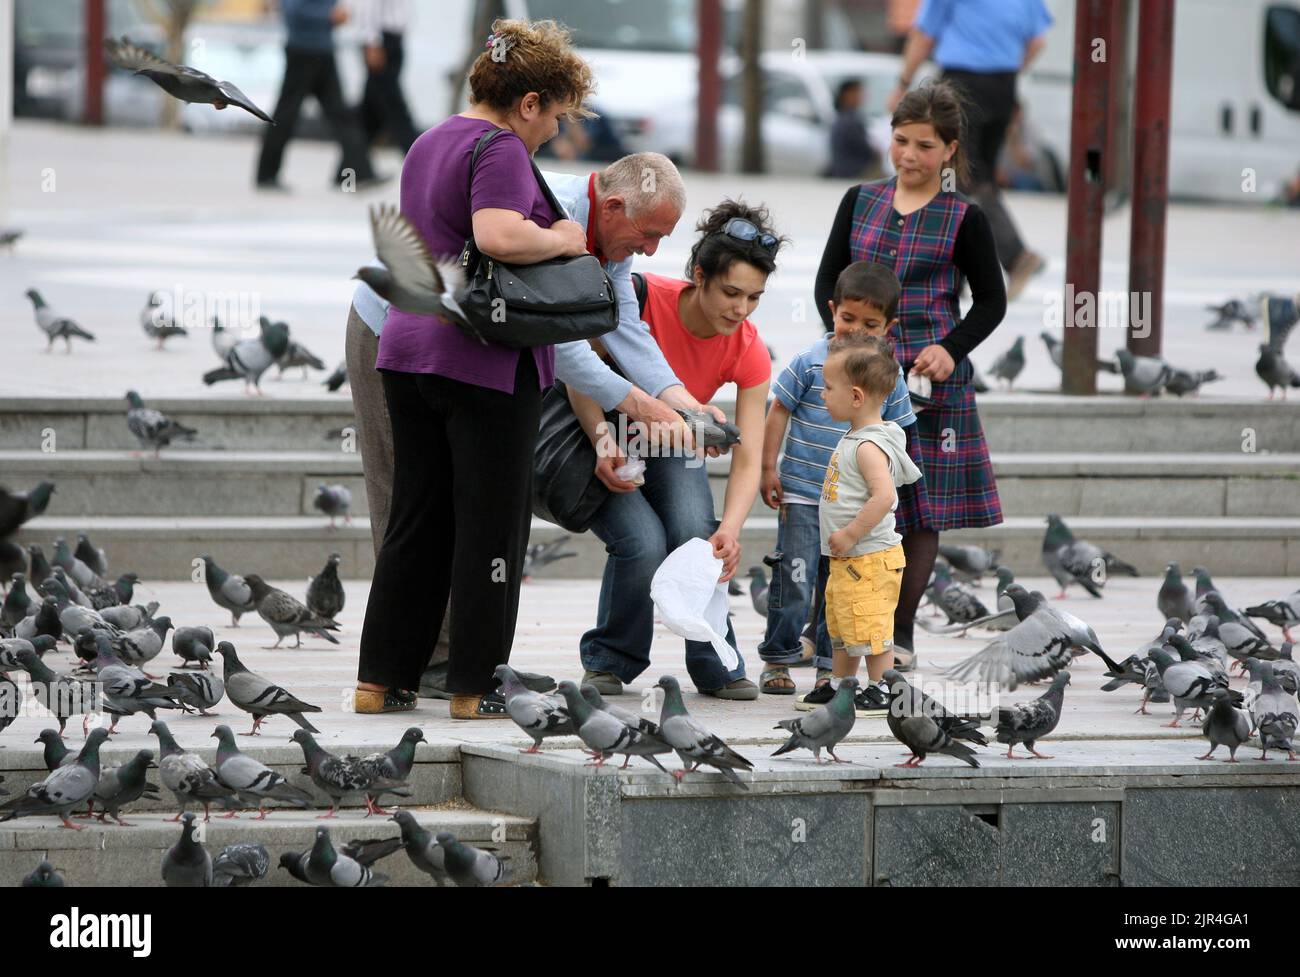 A man holding a pigeon shows it to a boy in Guvercin Yemleme Alani, a park at Ankara in Turkey. Stock Photo